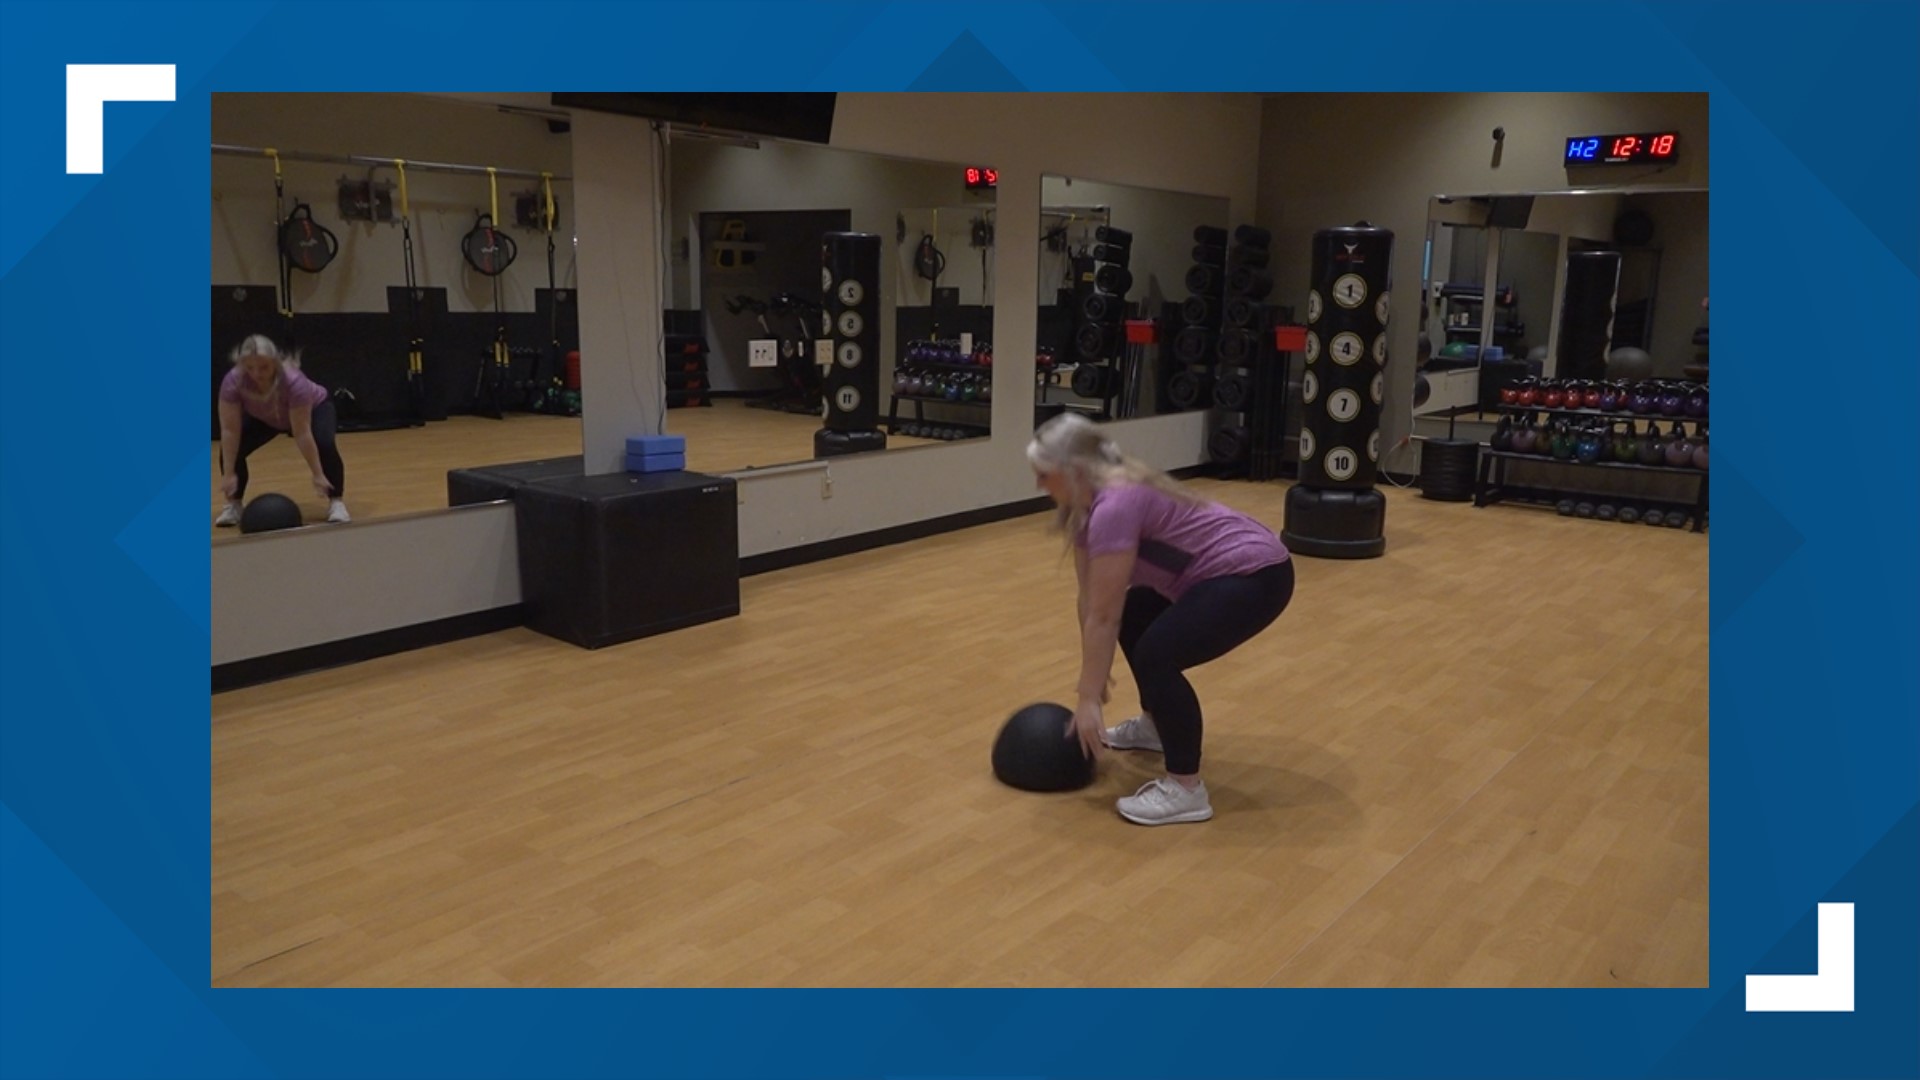 Need a move that will help your cardio, strength and stress relief? This week's FOX43 FitMinute has just what you need!